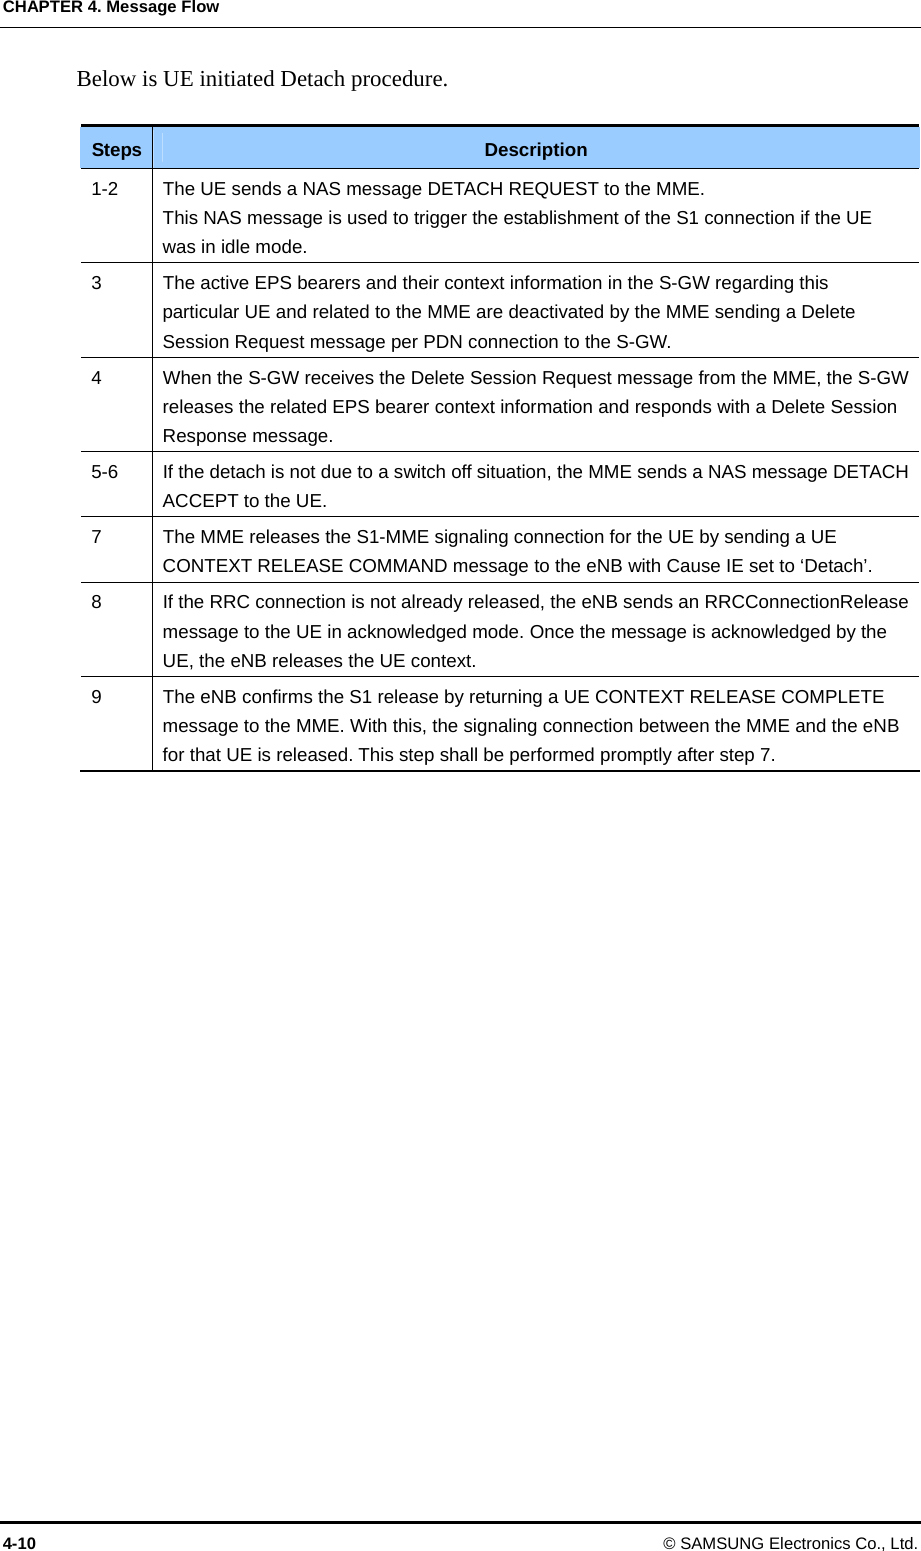 CHAPTER 4. Message Flow 4-10  © SAMSUNG Electronics Co., Ltd. Below is UE initiated Detach procedure.  Steps  Description 1-2  The UE sends a NAS message DETACH REQUEST to the MME.   This NAS message is used to trigger the establishment of the S1 connection if the UE was in idle mode. 3  The active EPS bearers and their context information in the S-GW regarding this particular UE and related to the MME are deactivated by the MME sending a Delete Session Request message per PDN connection to the S-GW. 4  When the S-GW receives the Delete Session Request message from the MME, the S-GW releases the related EPS bearer context information and responds with a Delete Session Response message. 5-6  If the detach is not due to a switch off situation, the MME sends a NAS message DETACH ACCEPT to the UE. 7  The MME releases the S1-MME signaling connection for the UE by sending a UE CONTEXT RELEASE COMMAND message to the eNB with Cause IE set to ‘Detach’. 8  If the RRC connection is not already released, the eNB sends an RRCConnectionRelease message to the UE in acknowledged mode. Once the message is acknowledged by the UE, the eNB releases the UE context. 9  The eNB confirms the S1 release by returning a UE CONTEXT RELEASE COMPLETE message to the MME. With this, the signaling connection between the MME and the eNB for that UE is released. This step shall be performed promptly after step 7.  